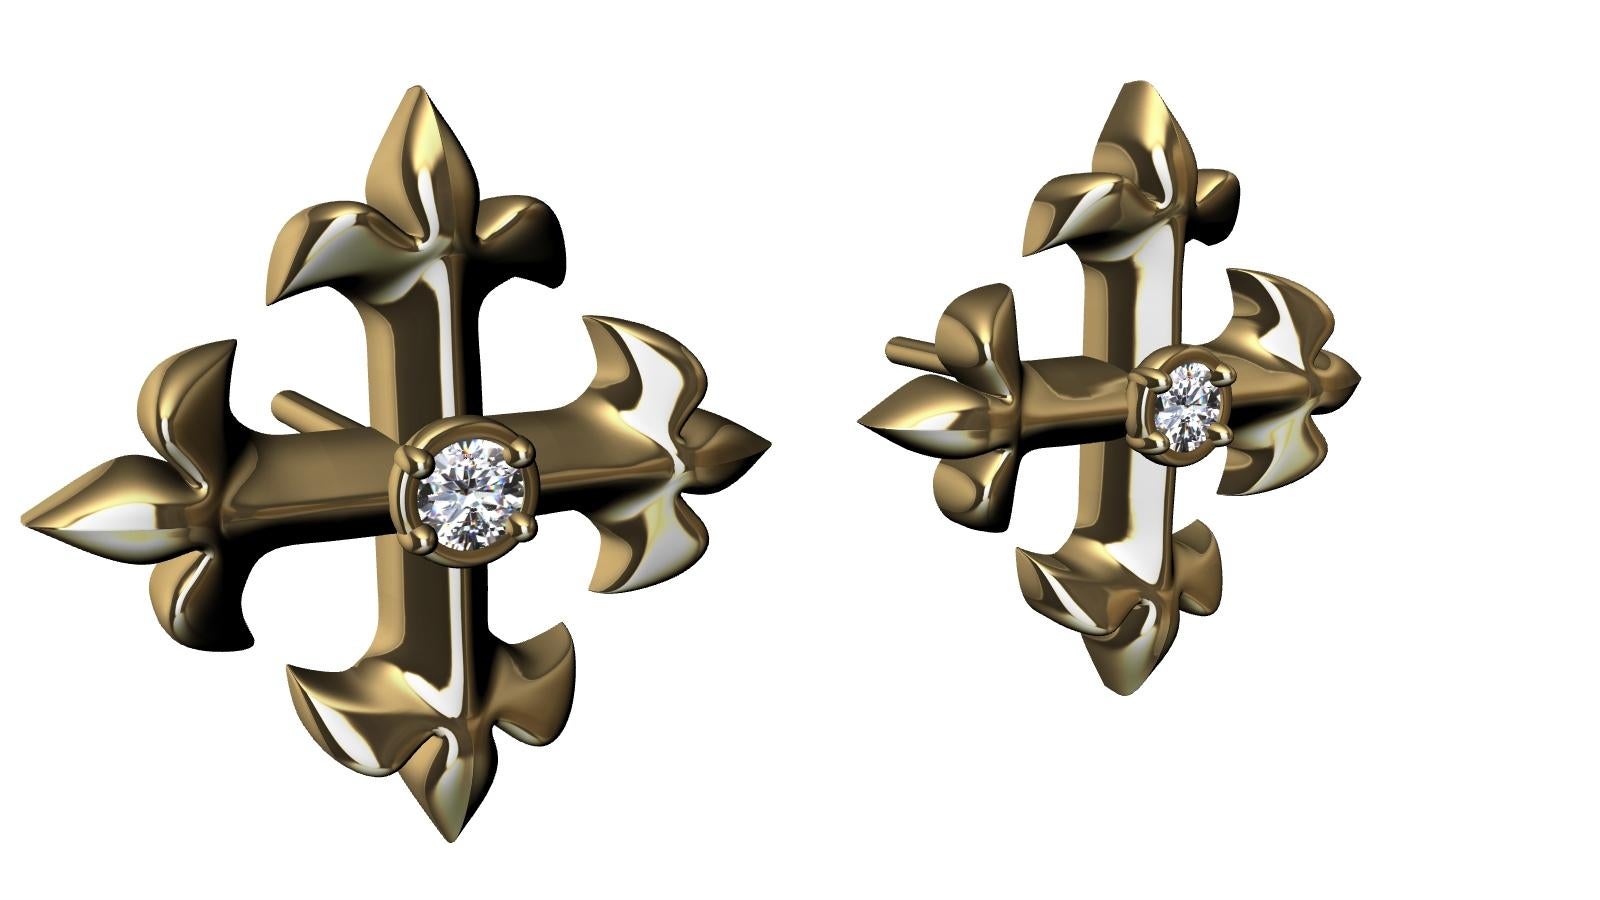 18 Karat Yellow Gold  West 46 Cross Stud Earrings,  This Fleur de Lis Cross is inspired from a stain glass window from a church on west 46th street, NYC. The royal stylized lily made of 3 petals  is known from the former Royals of Arms of France. In